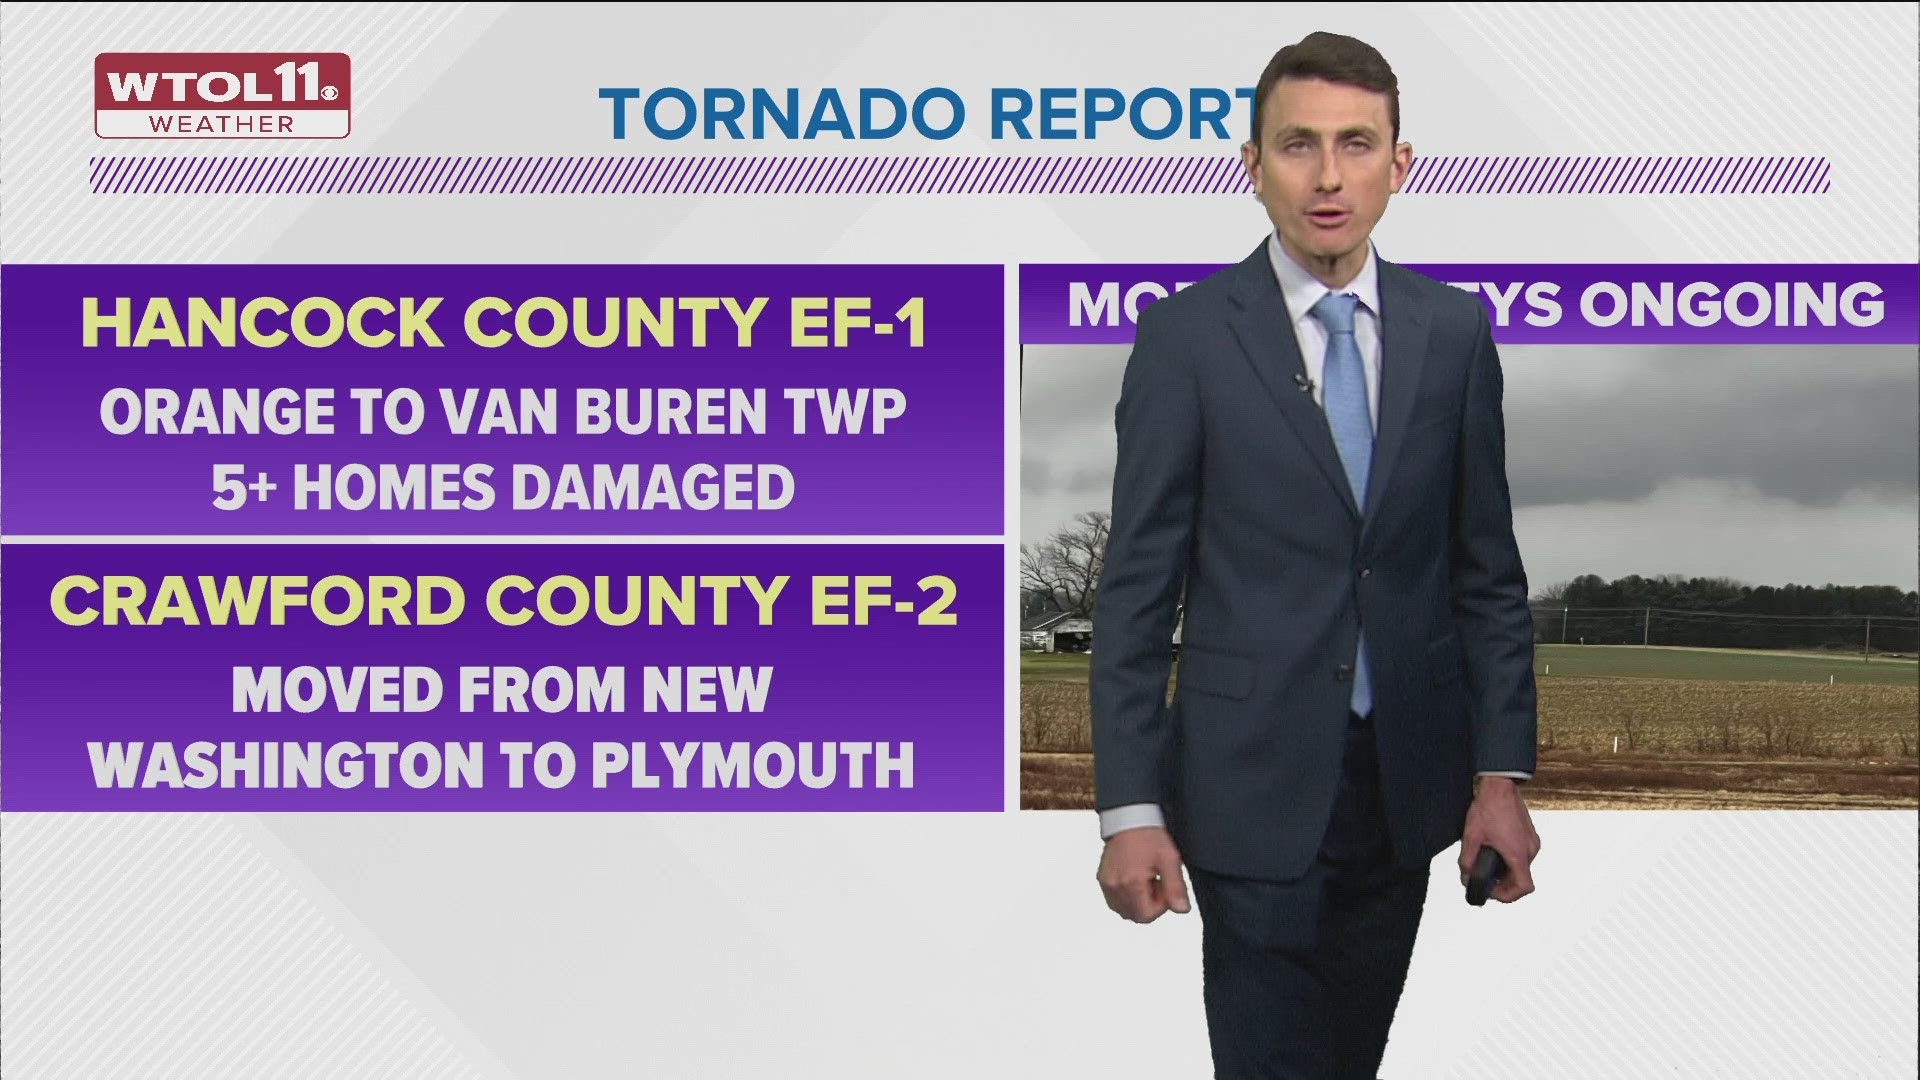 Tornadoes in Hancock and Crawford counties Thursday were exceptionally powerful for storms this early in the season.